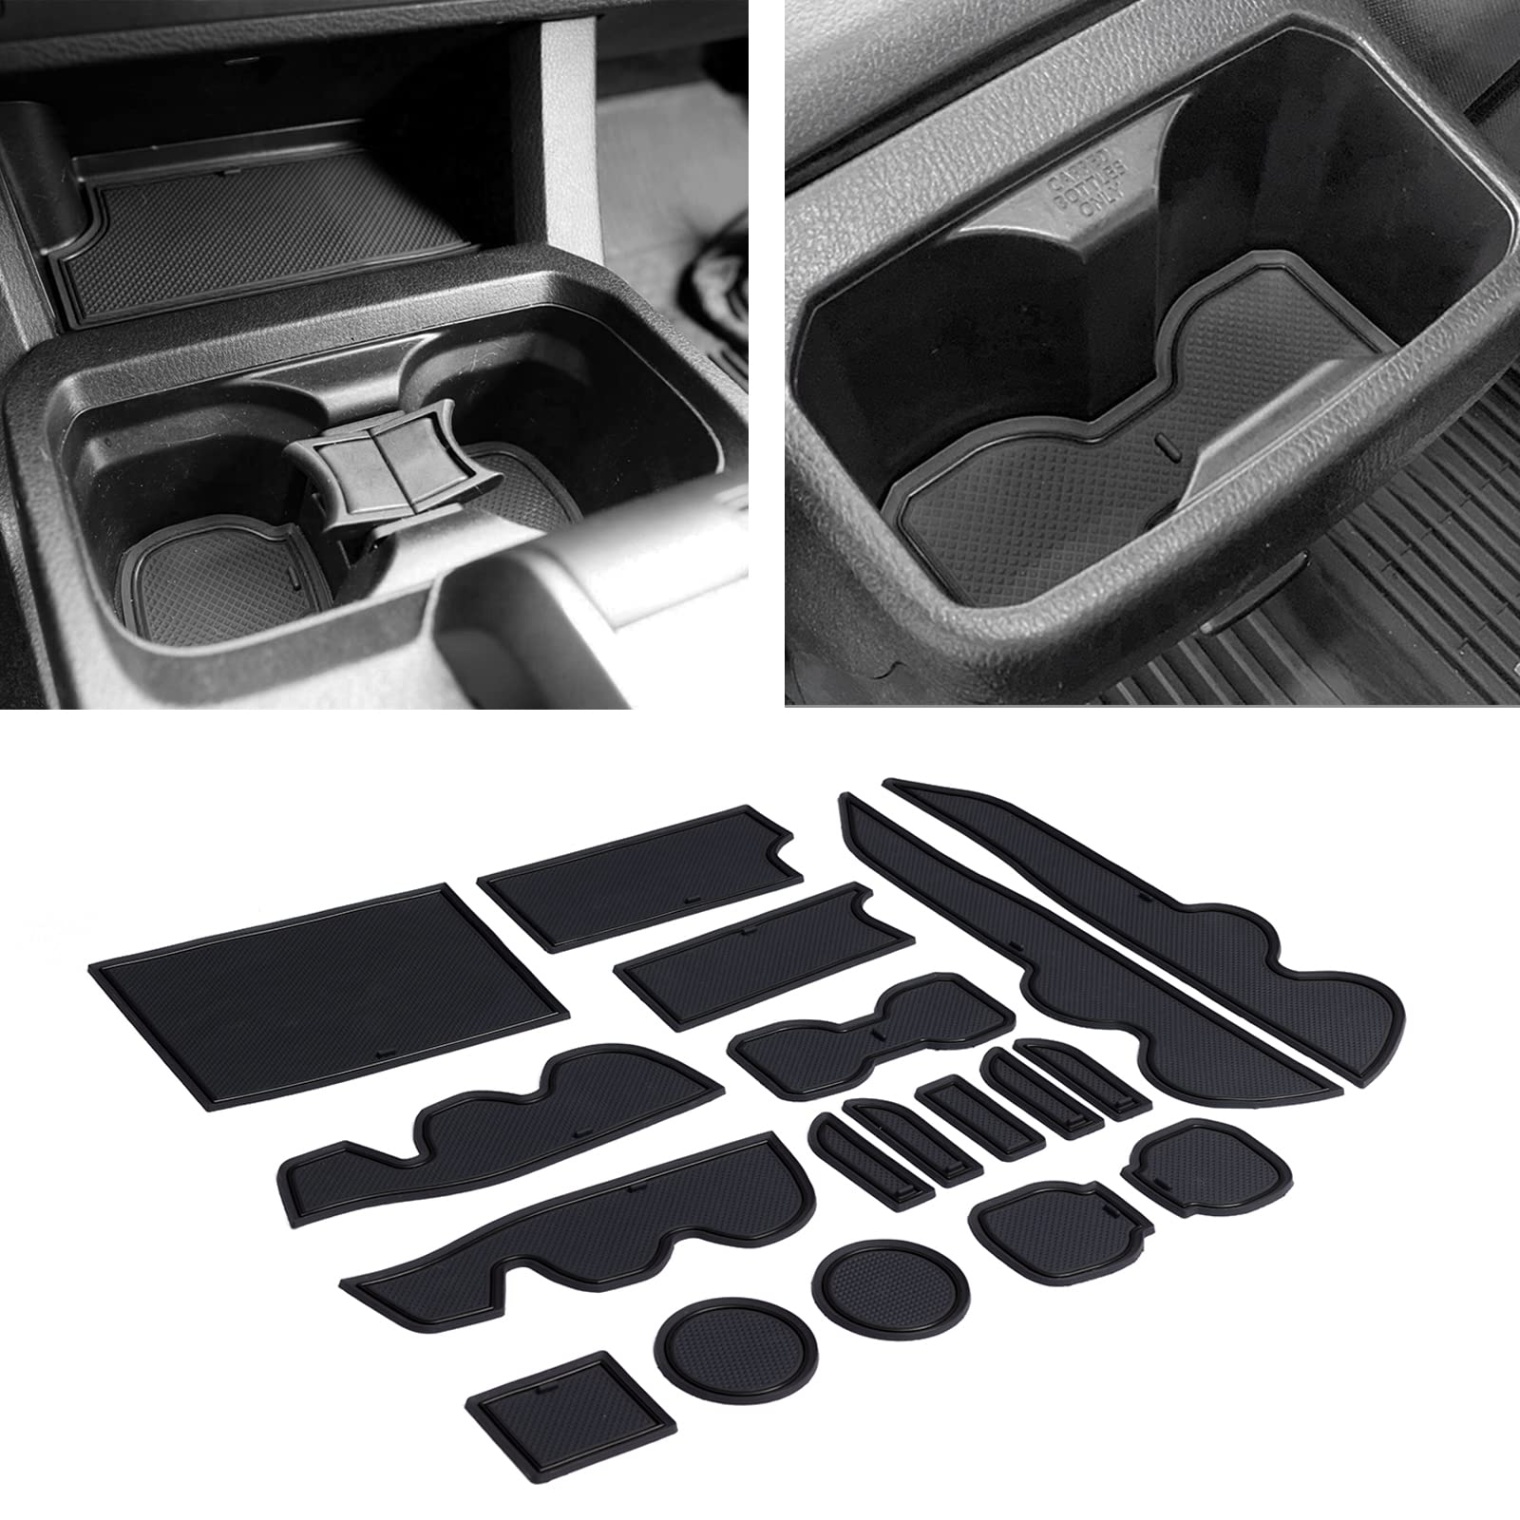 accessories toyota tacoma 2016 Bulan 3 JDMCAR Compatible with Toyota Tacoma Accessories - Premium Cup  Holder, Console, and Door Pocket Inserts Kit (Double Cab,Solid Black)